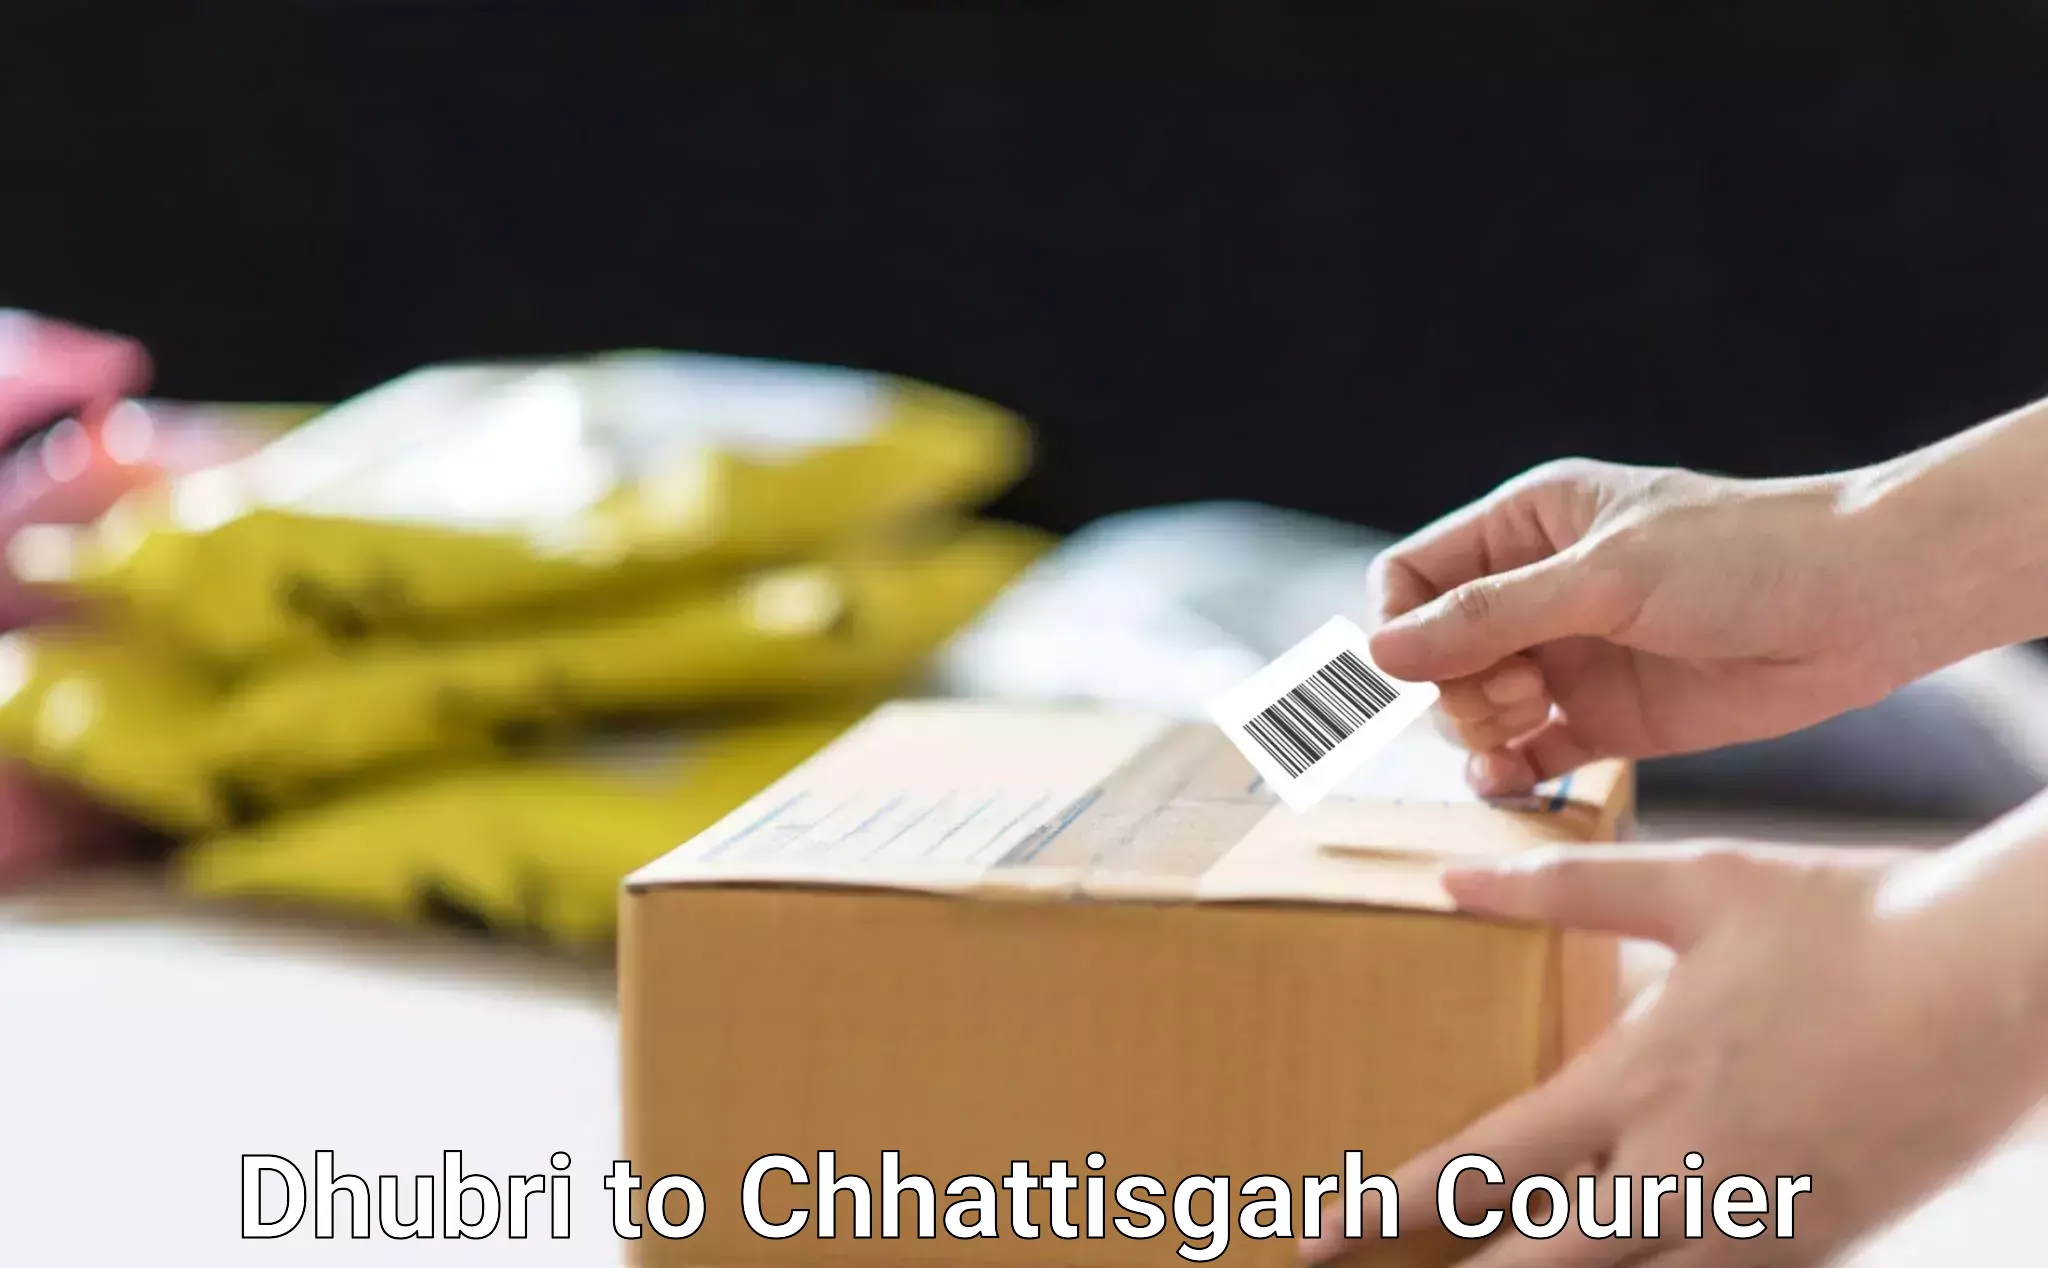 Reliable courier service Dhubri to Dharamjaigarh